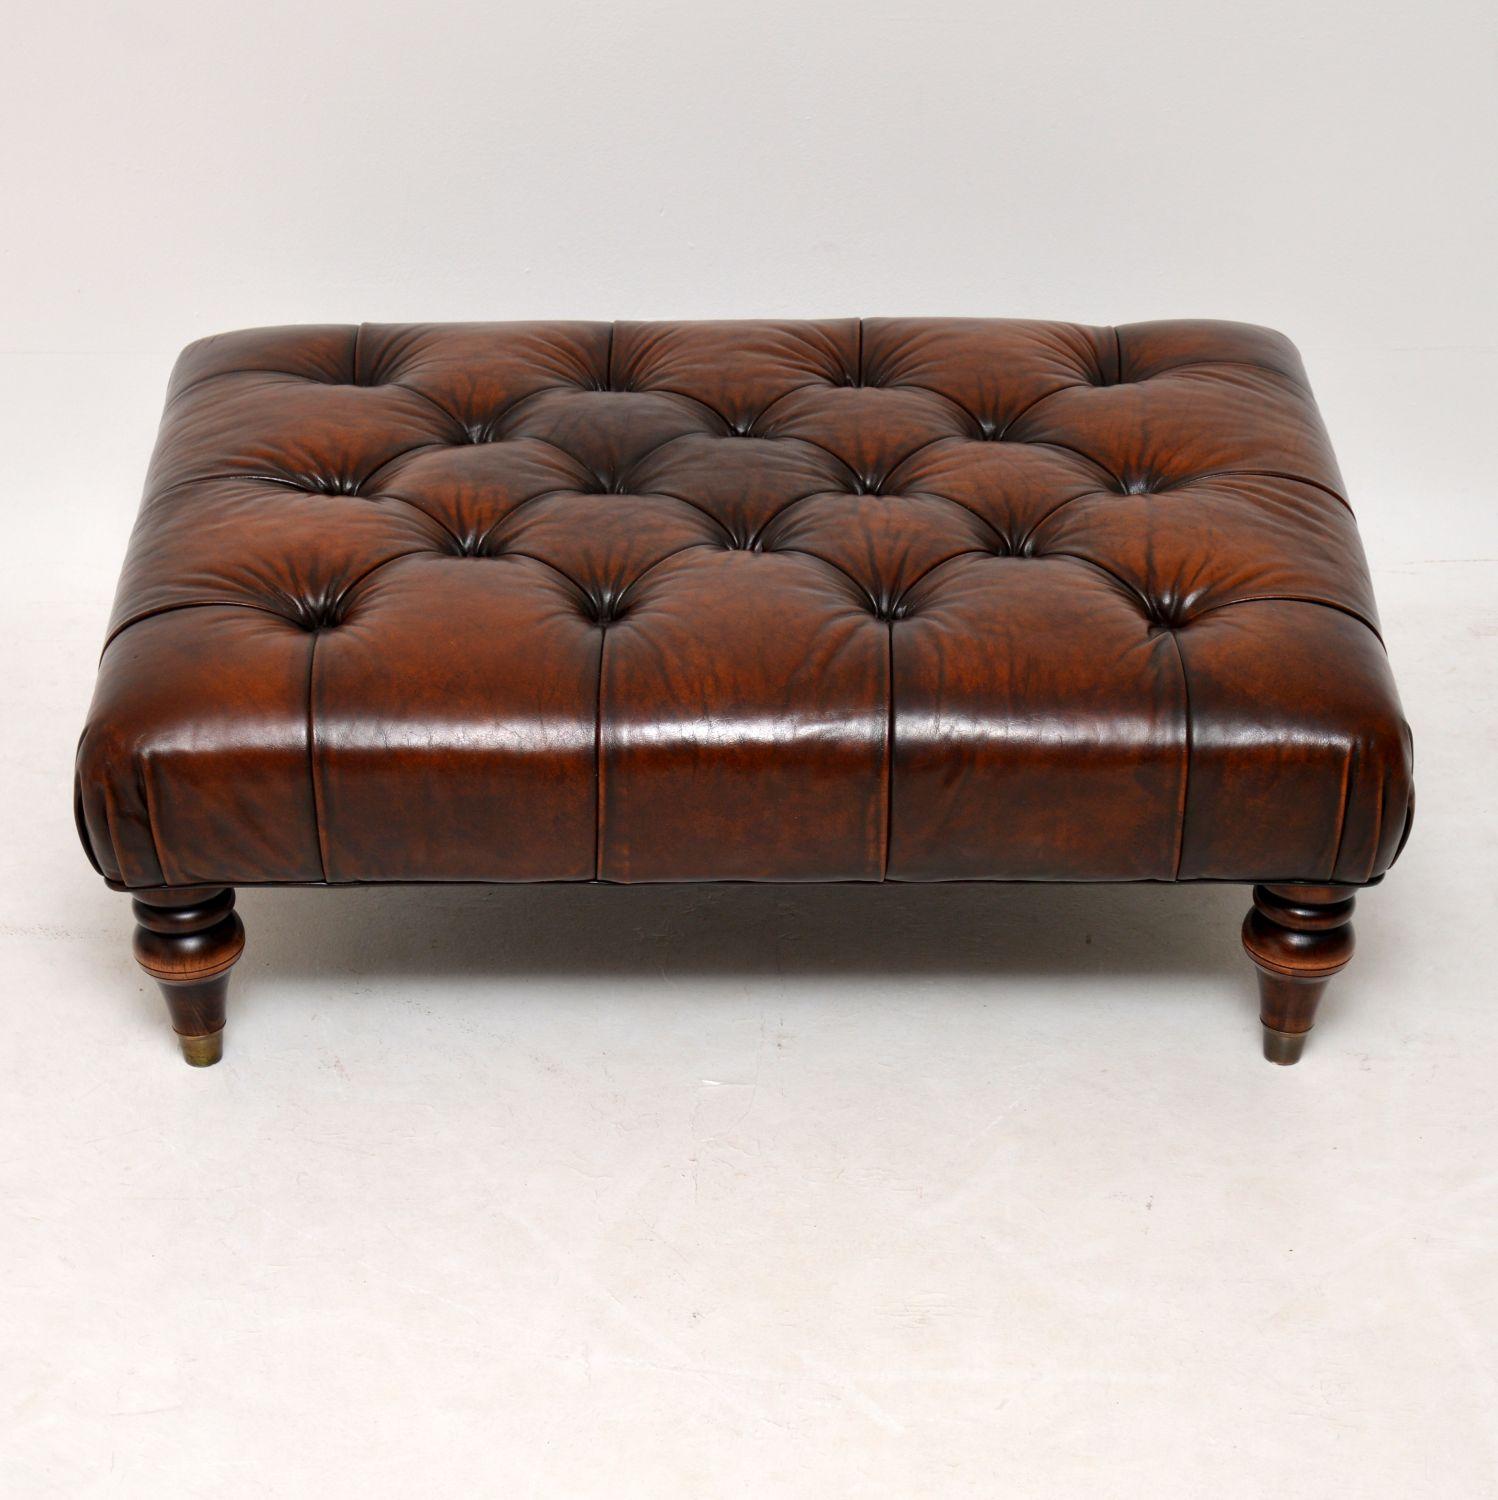 European Antique Victorian Style Deep Buttoned Leather Stool